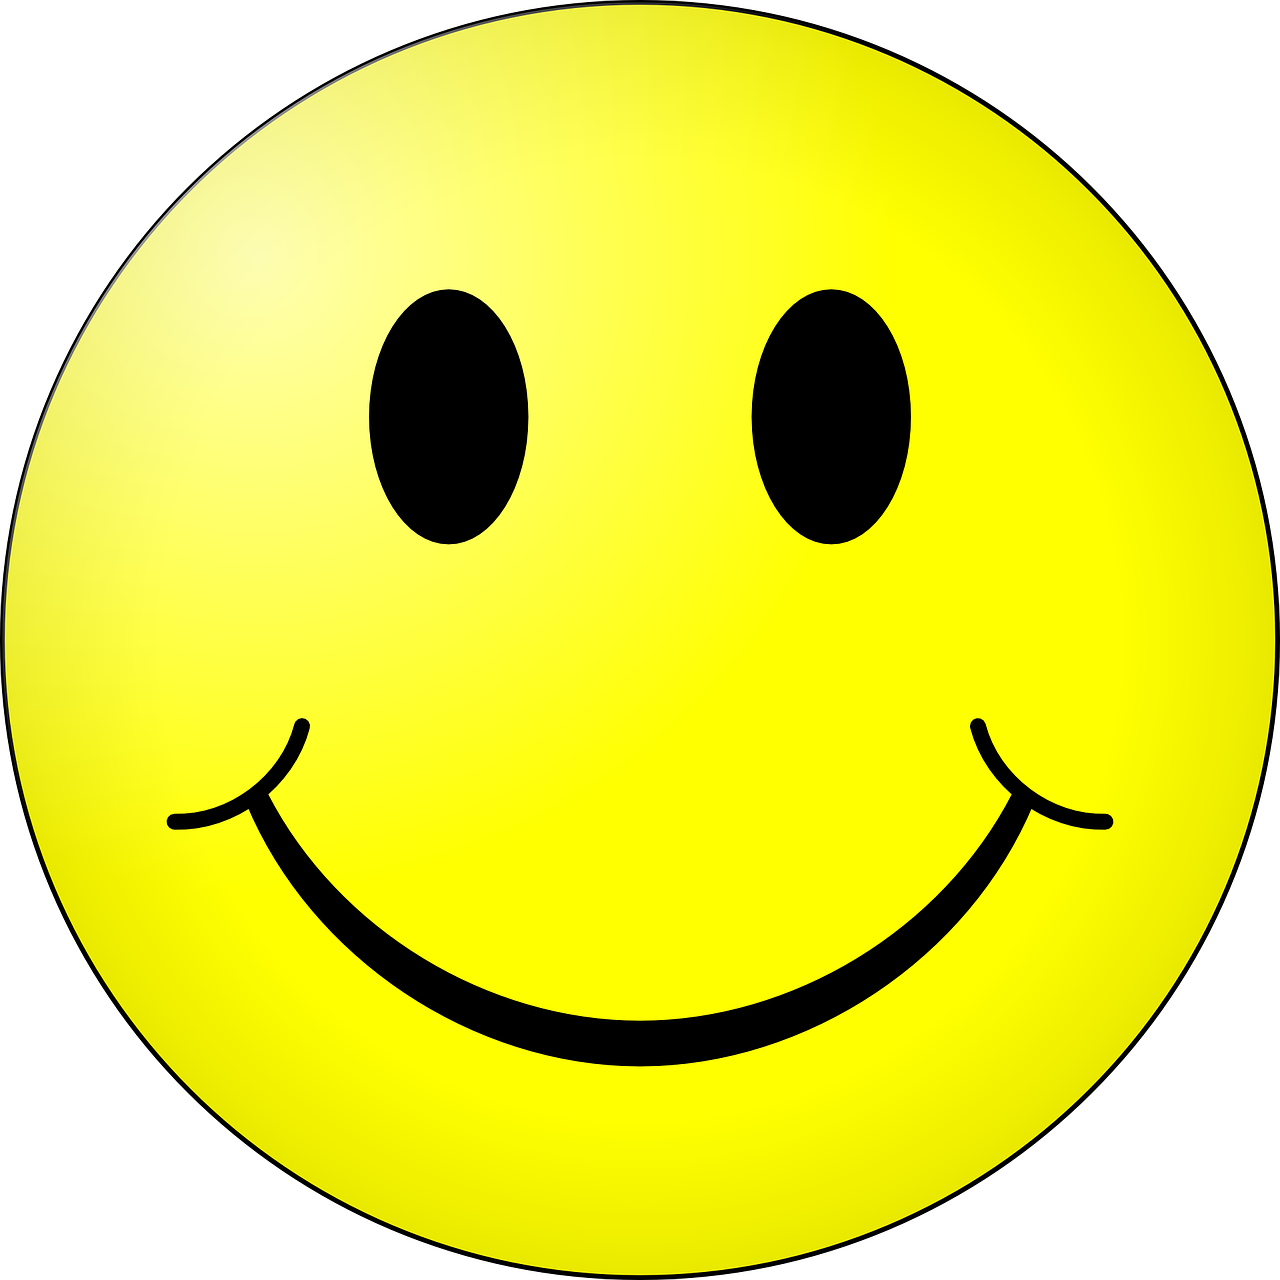 a yellow smiley face on a black background, a picture, clipart, !!!!!!!!!!!!!!!!!!!!!!!!!, symmetrical face happy, round chin